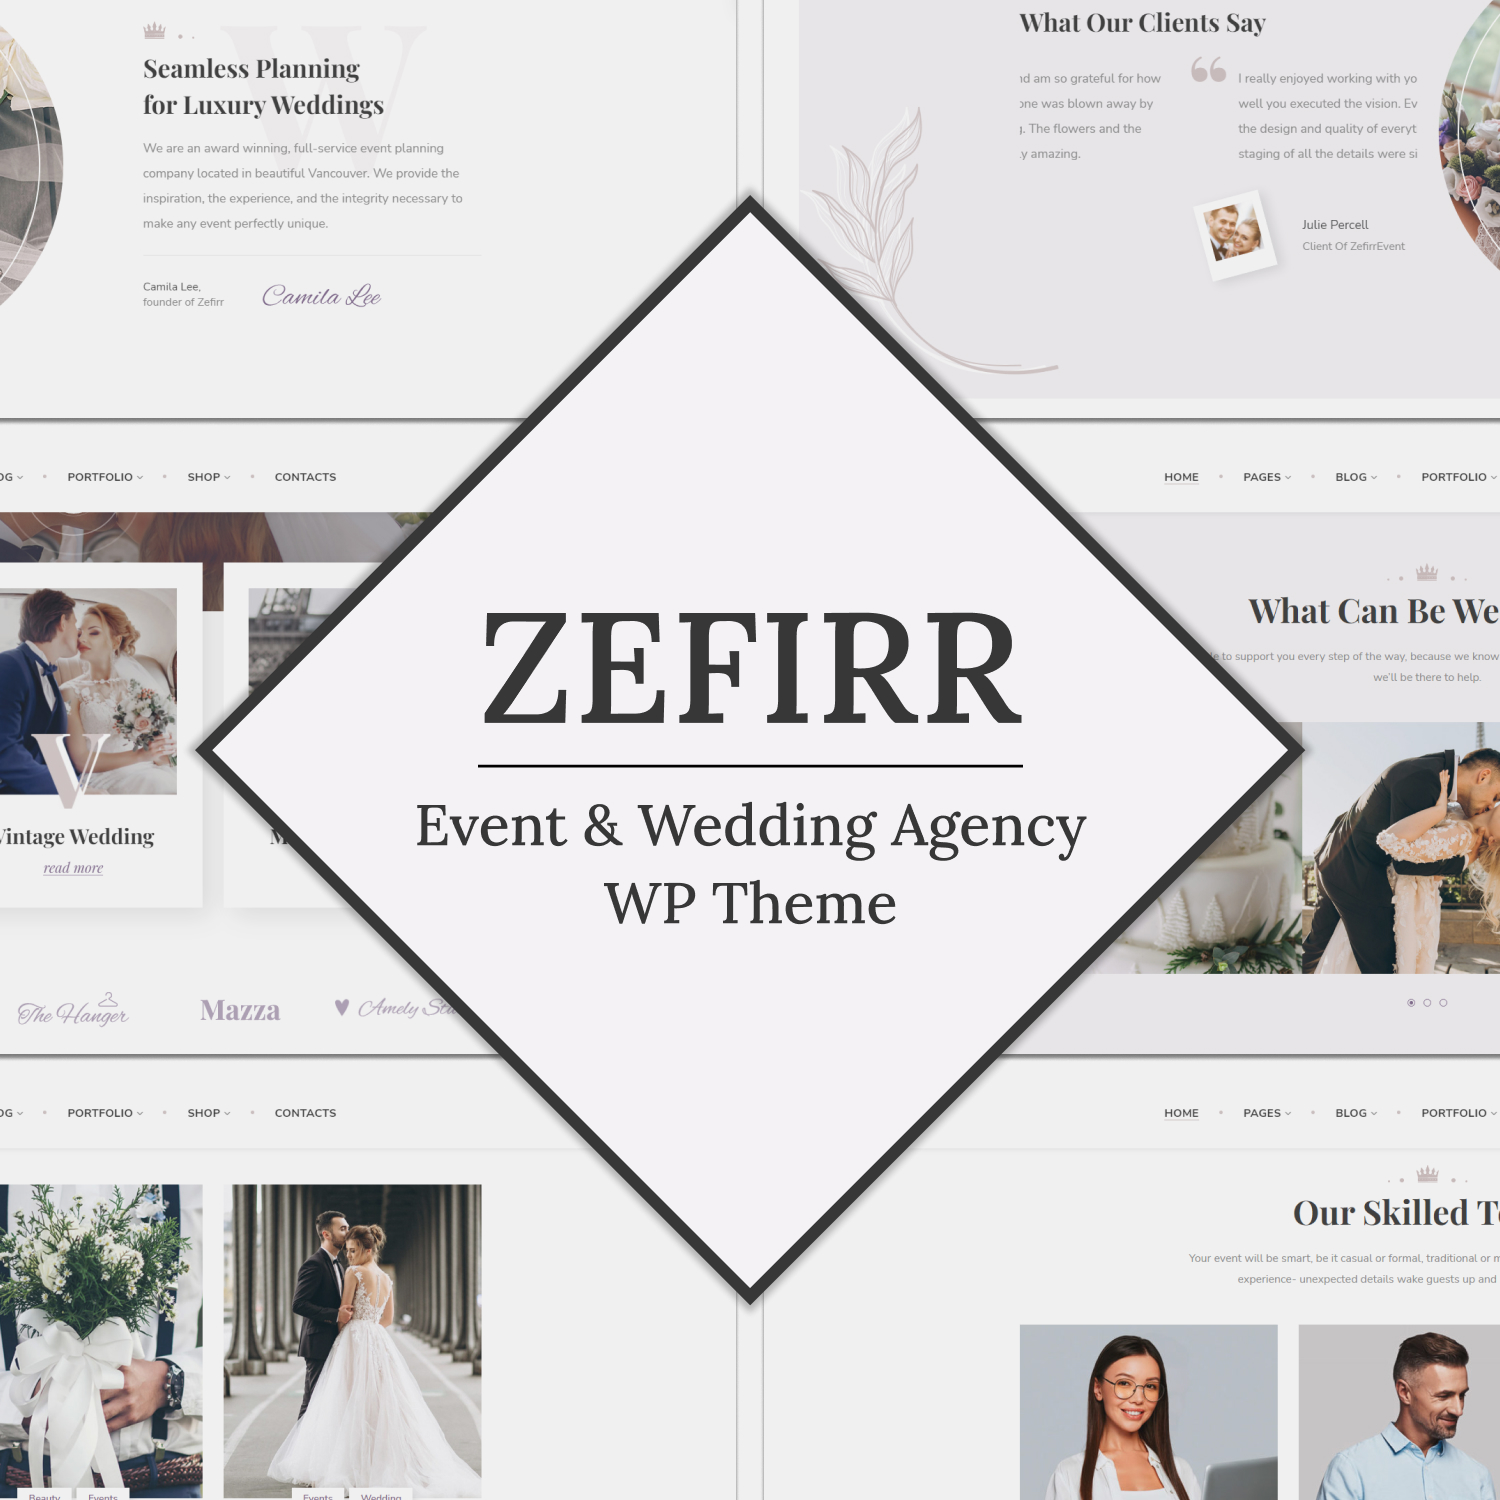 Preview zefirr event wedding agency theme.